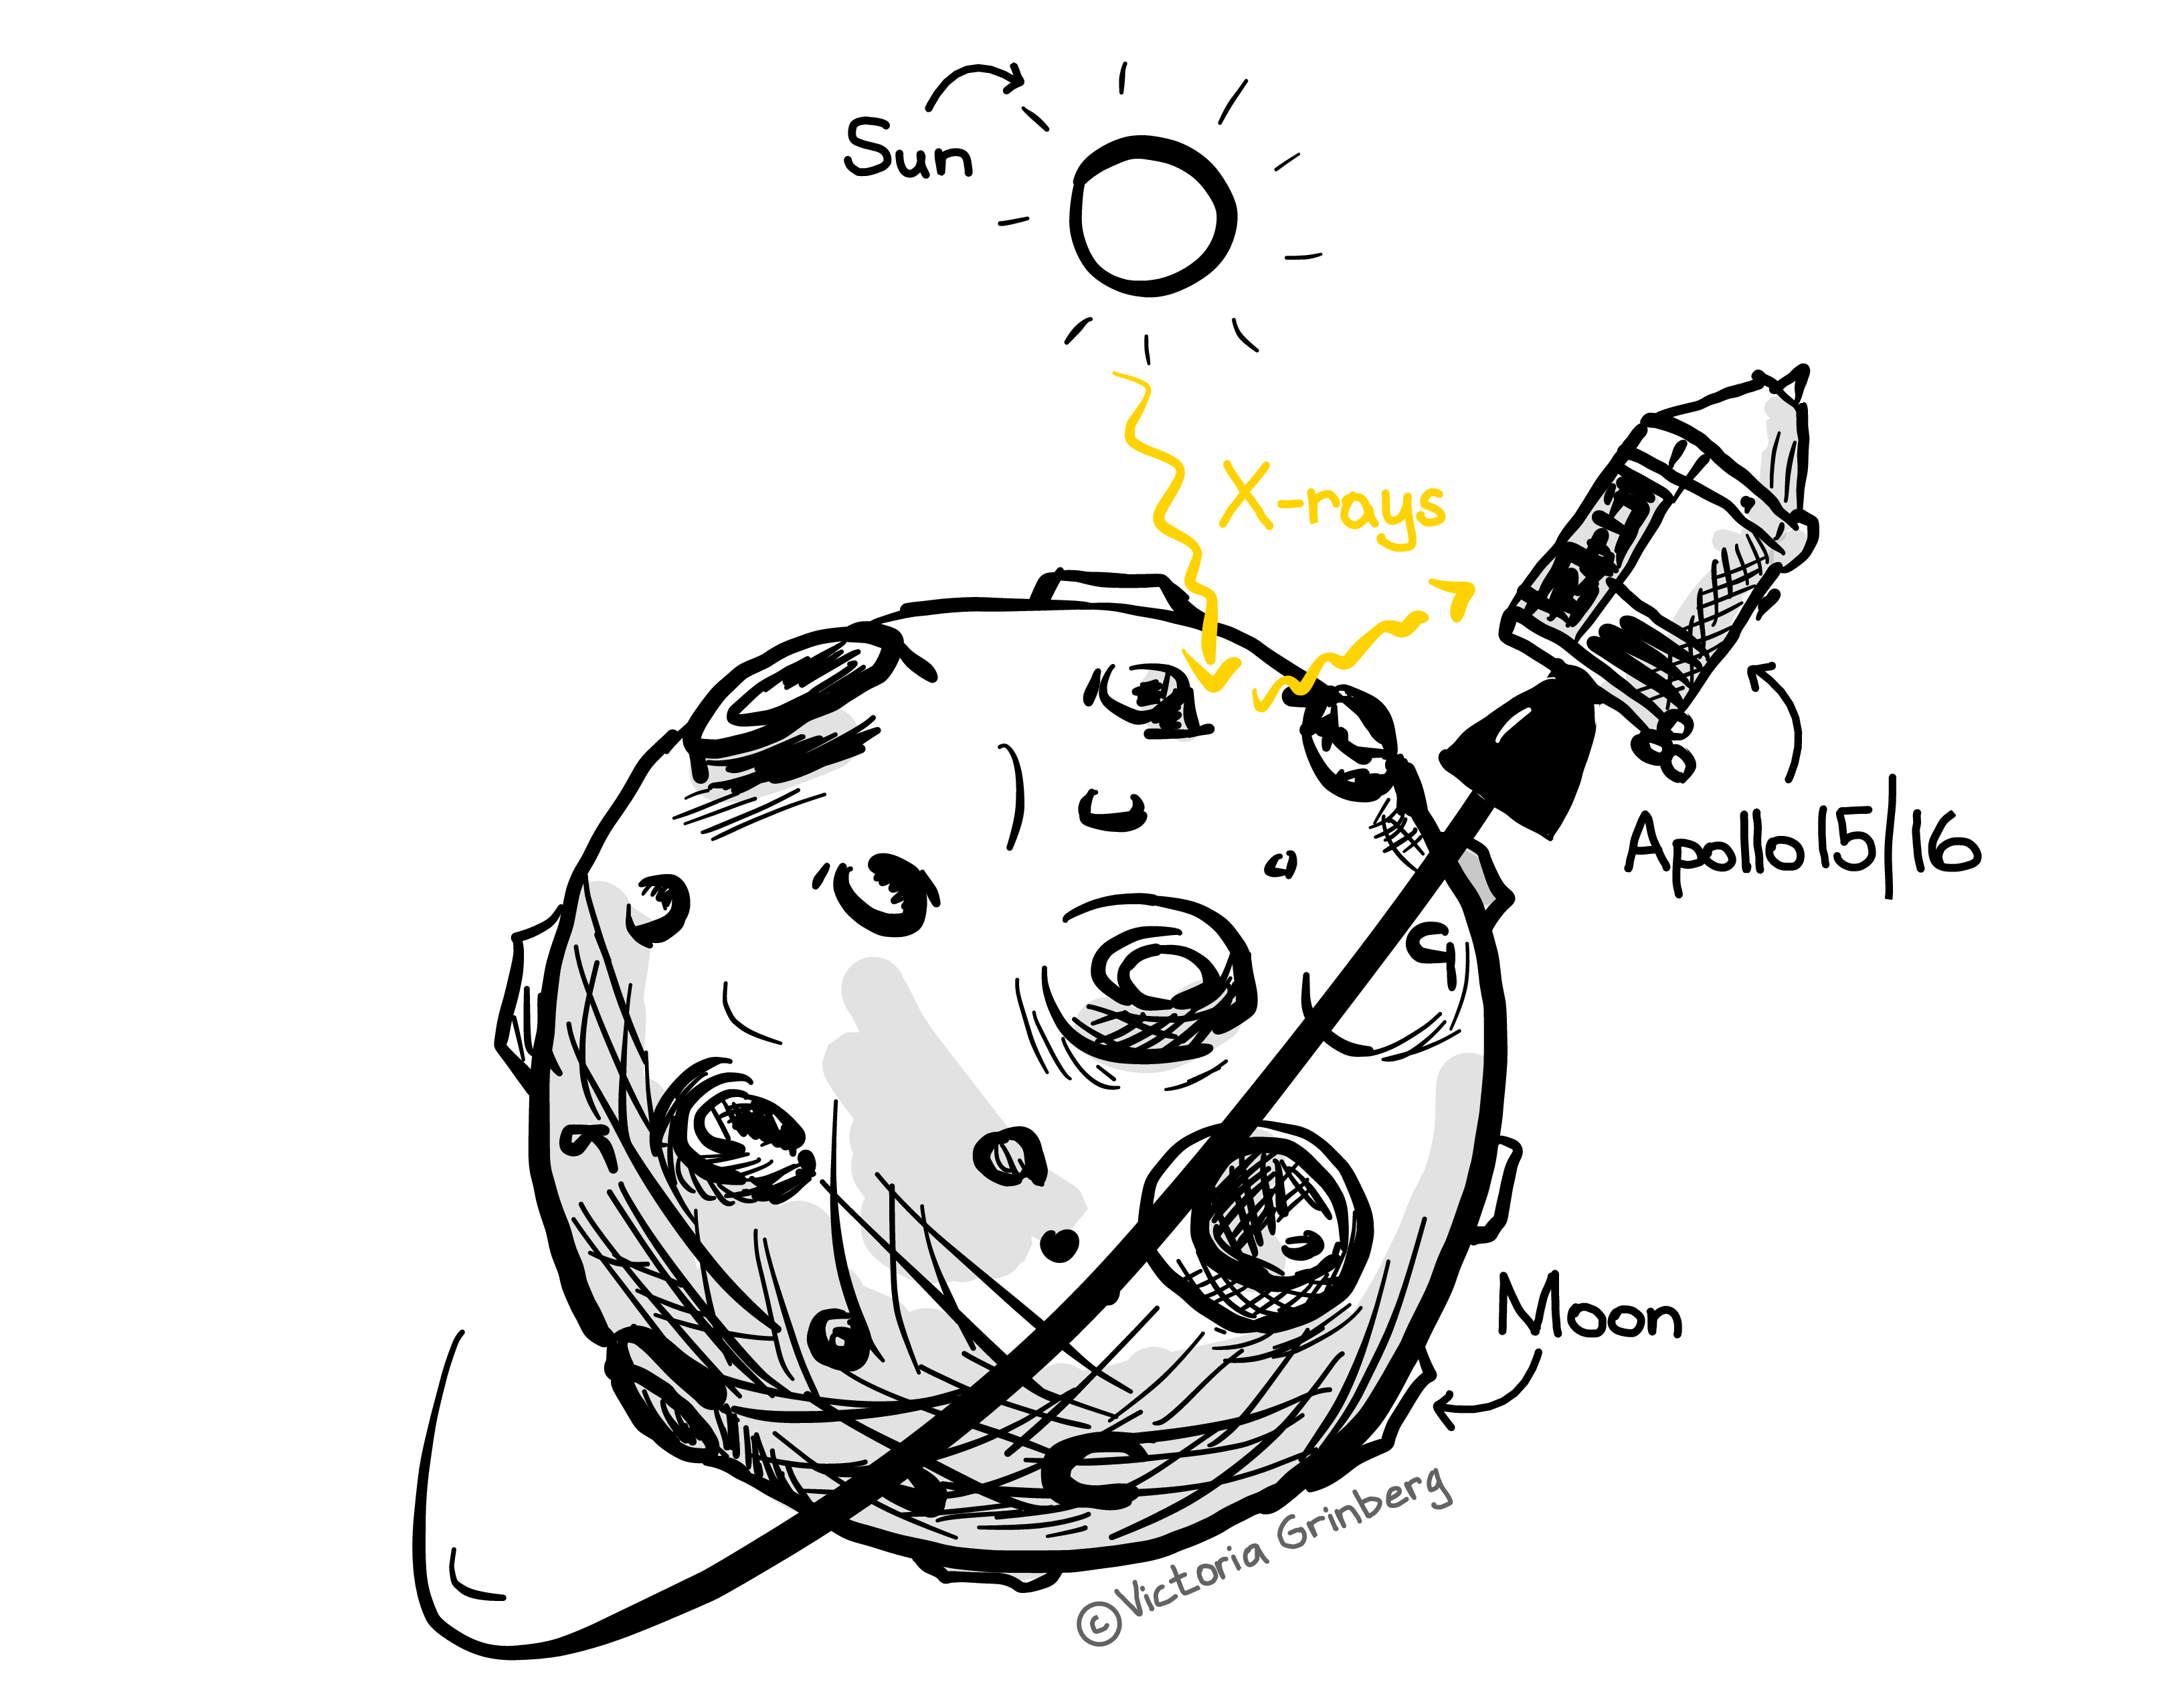 A very cartoon-ish sketch of the moon with an Apollo spacecraft racing around it. X-rays from the sun hit the surface of the moon and are re-emitted towards the spacecraft. Sketch by Victoria Grinberg.